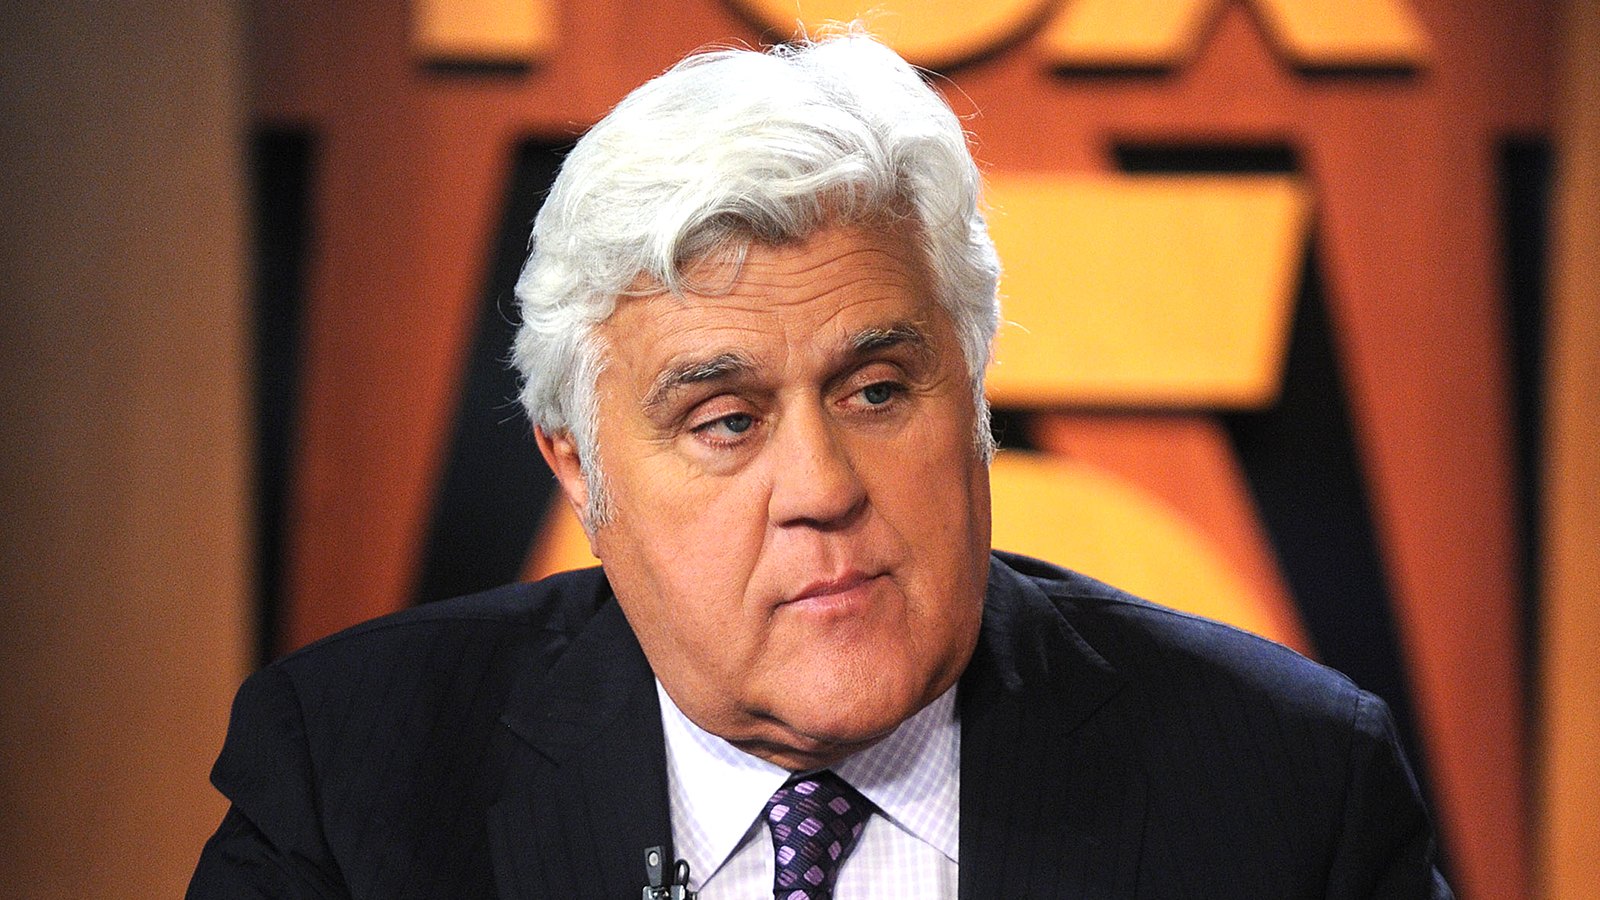 Jay Leno Broke His Collarbone, Ribs and Kneecaps in Motorcycle Accident After 2022 Hospitalization for Burns